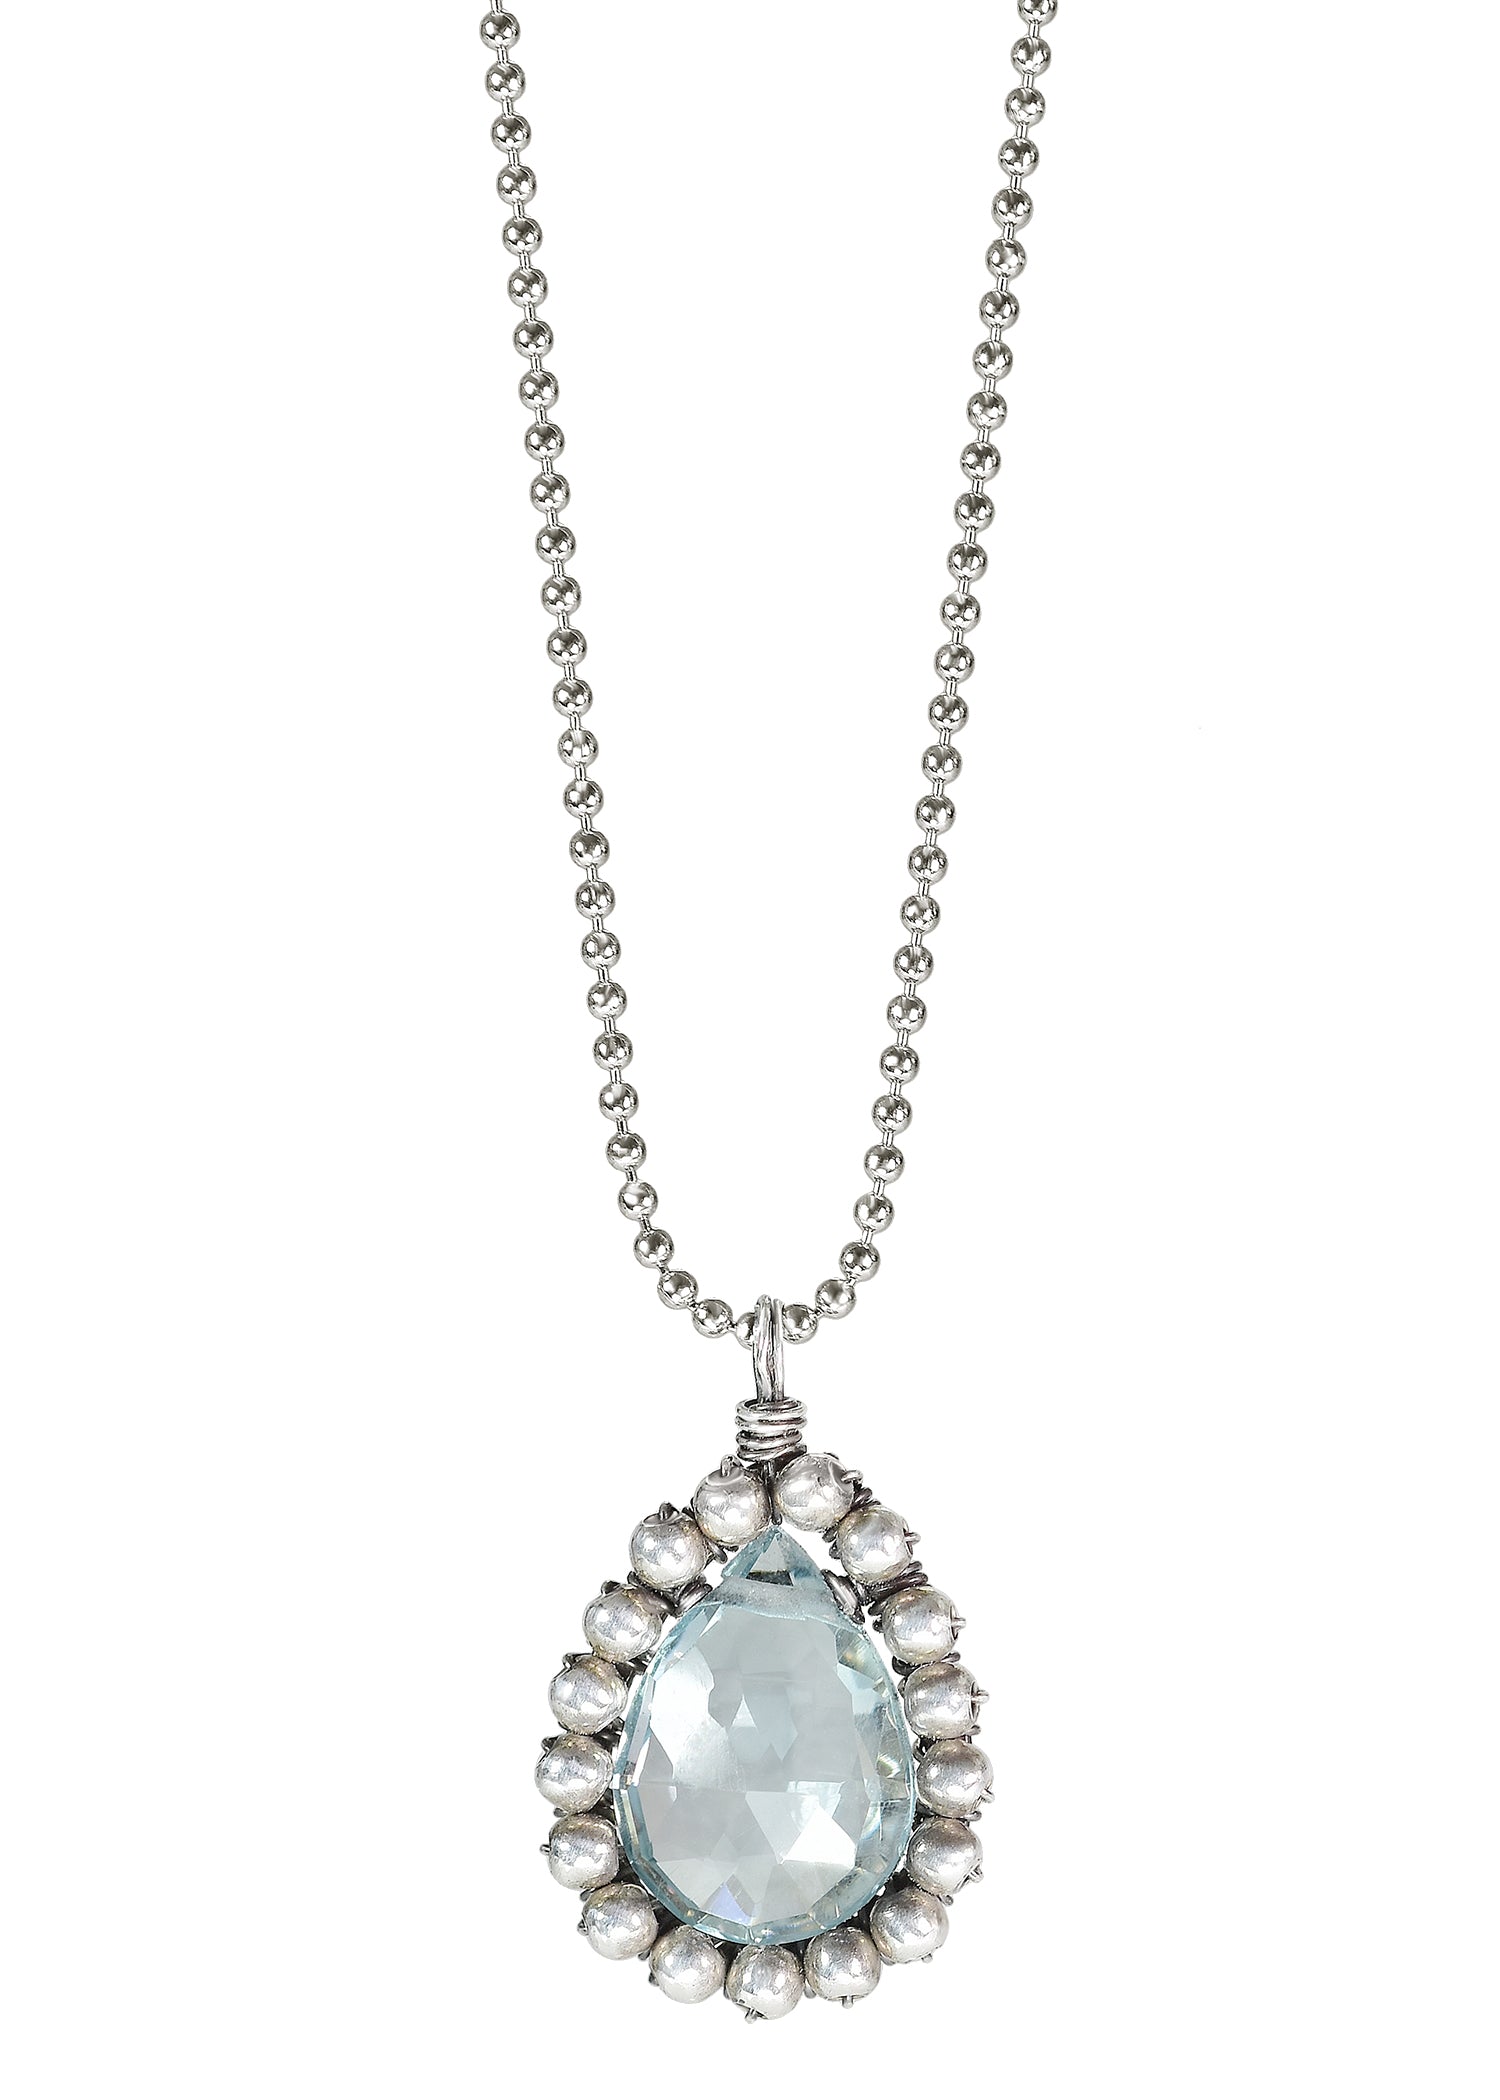 Aqua quartz Sterling silver Necklace measures 16" in length Pendant measures 5/8" in length and 7/16" in width at the widest point Handmade in our Los Angeles studio